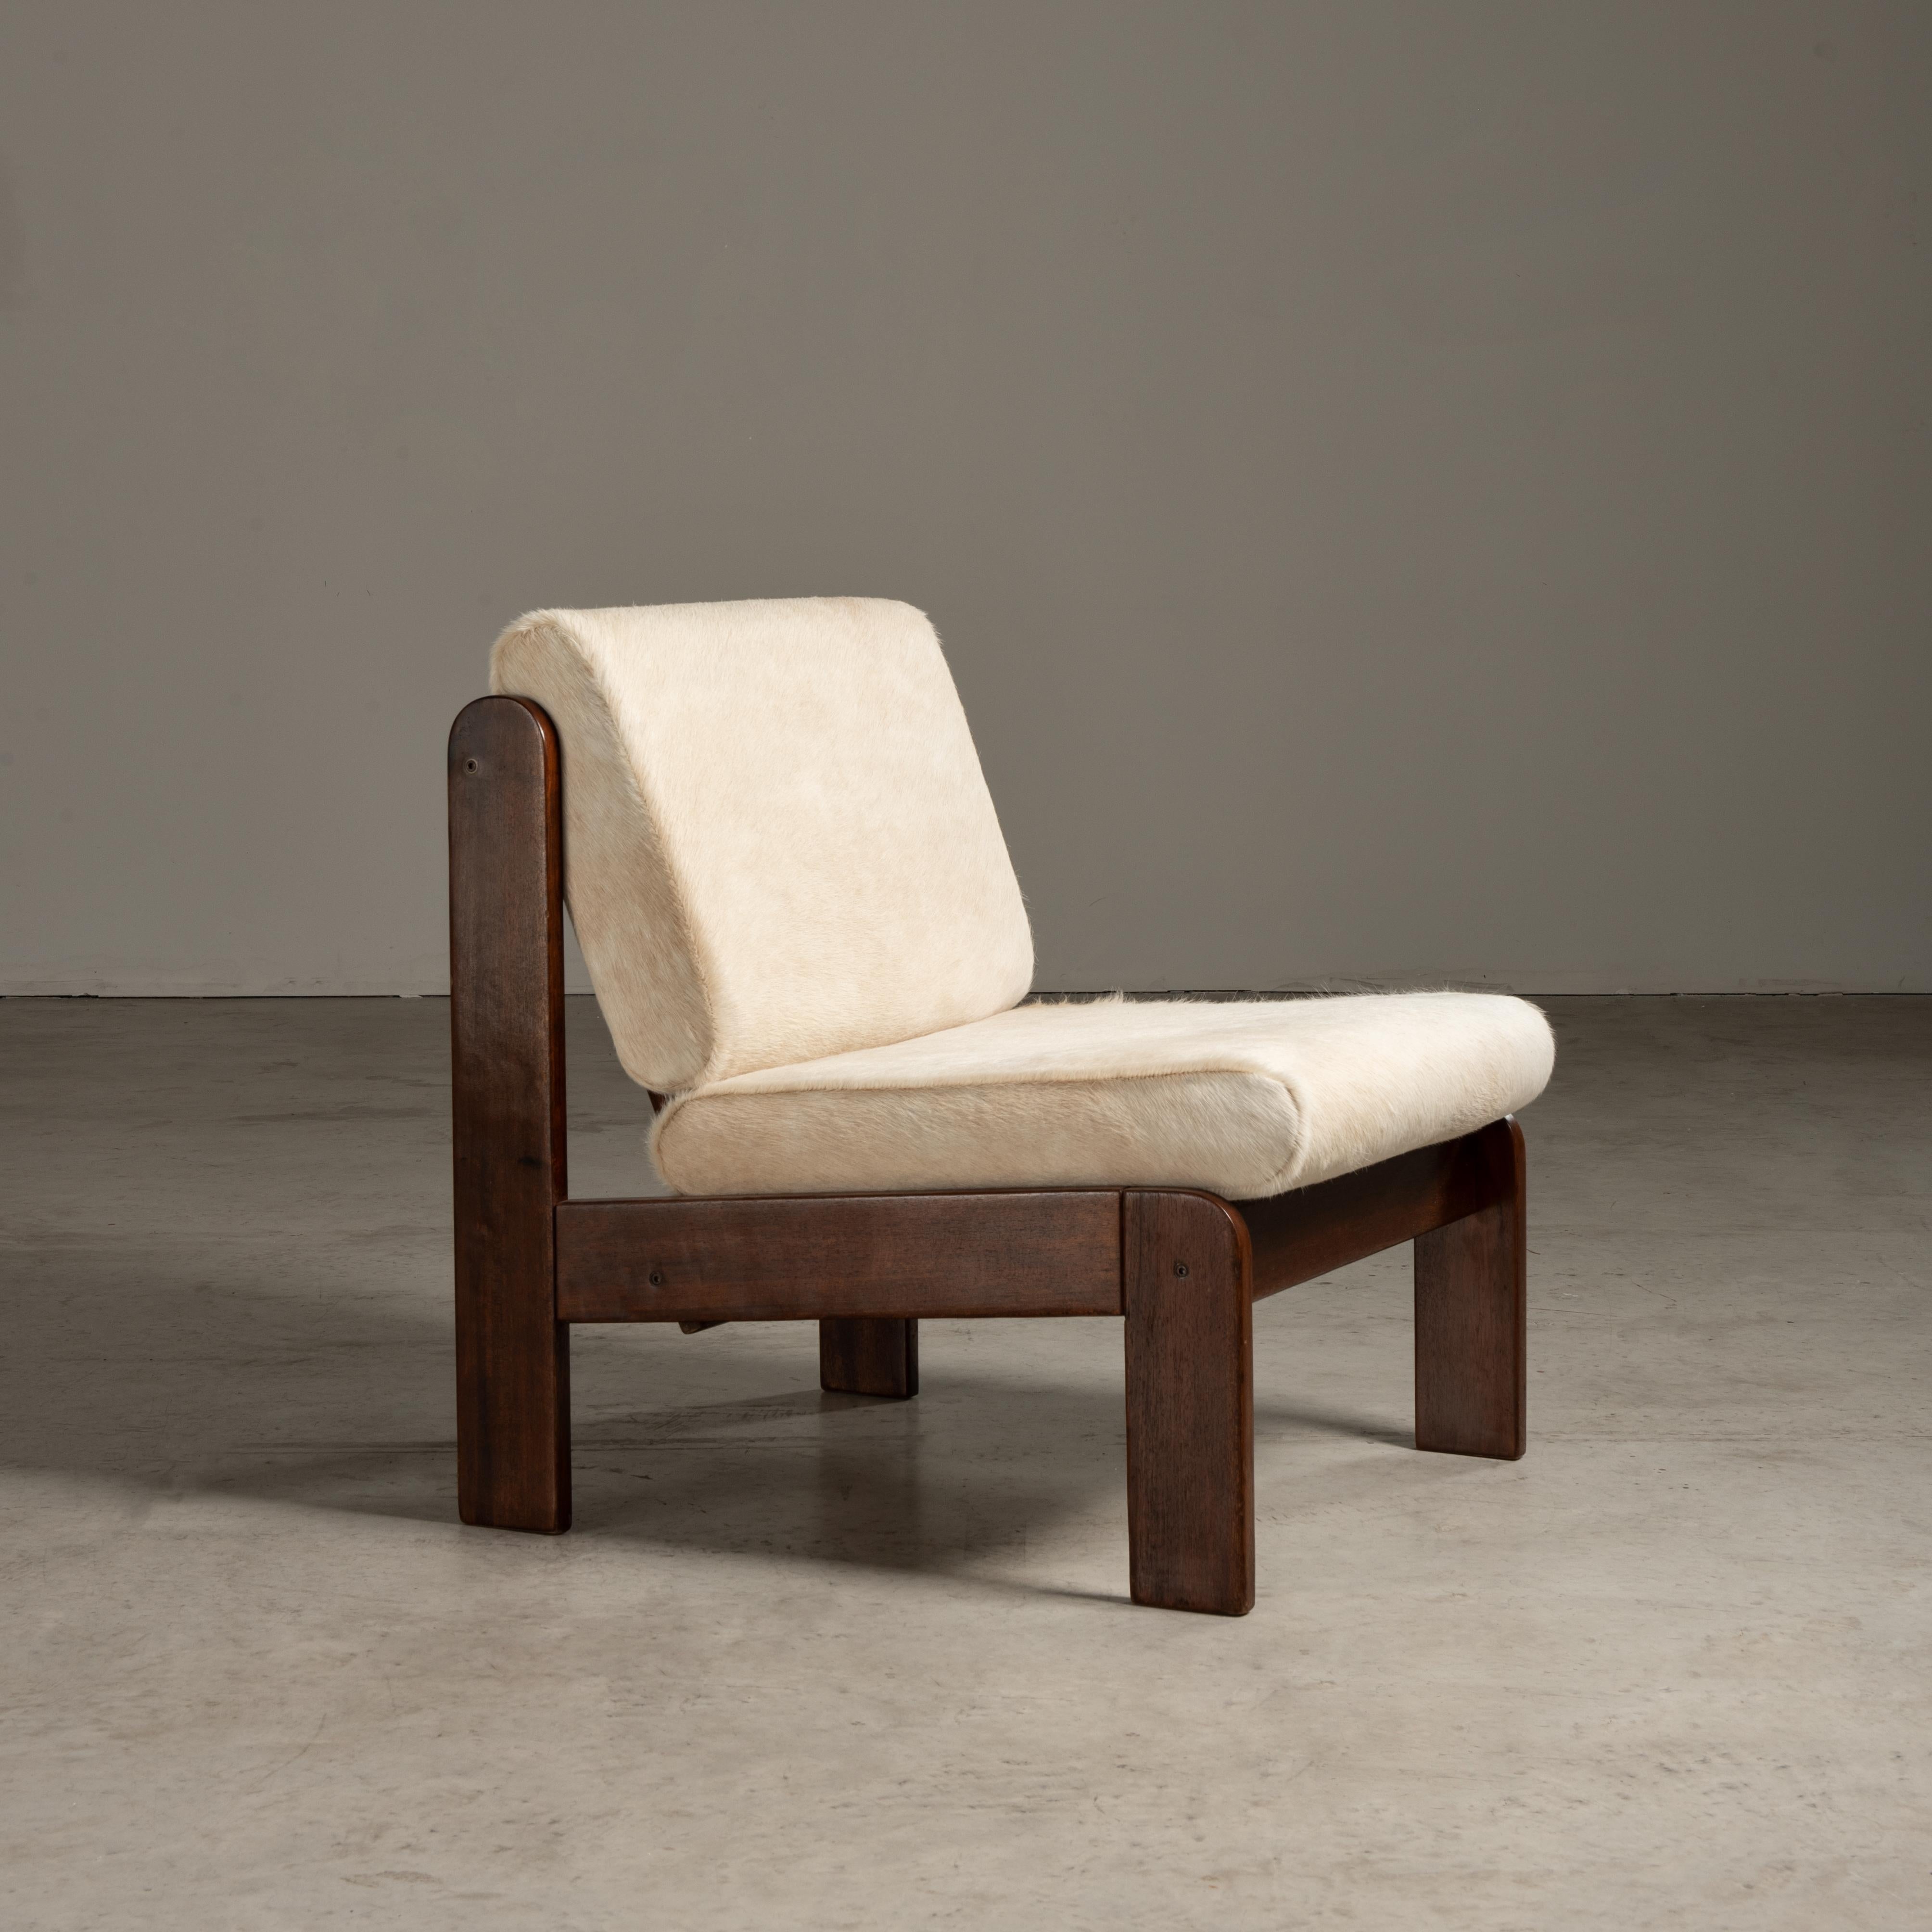 Crafted from the innovative mind of Geraldo de Barros, this lounge chair is a testament to the mid-century modern design movement that swept through Brazil, marrying the principles of modernism with the distinct flair of Brazilian aesthetics. The